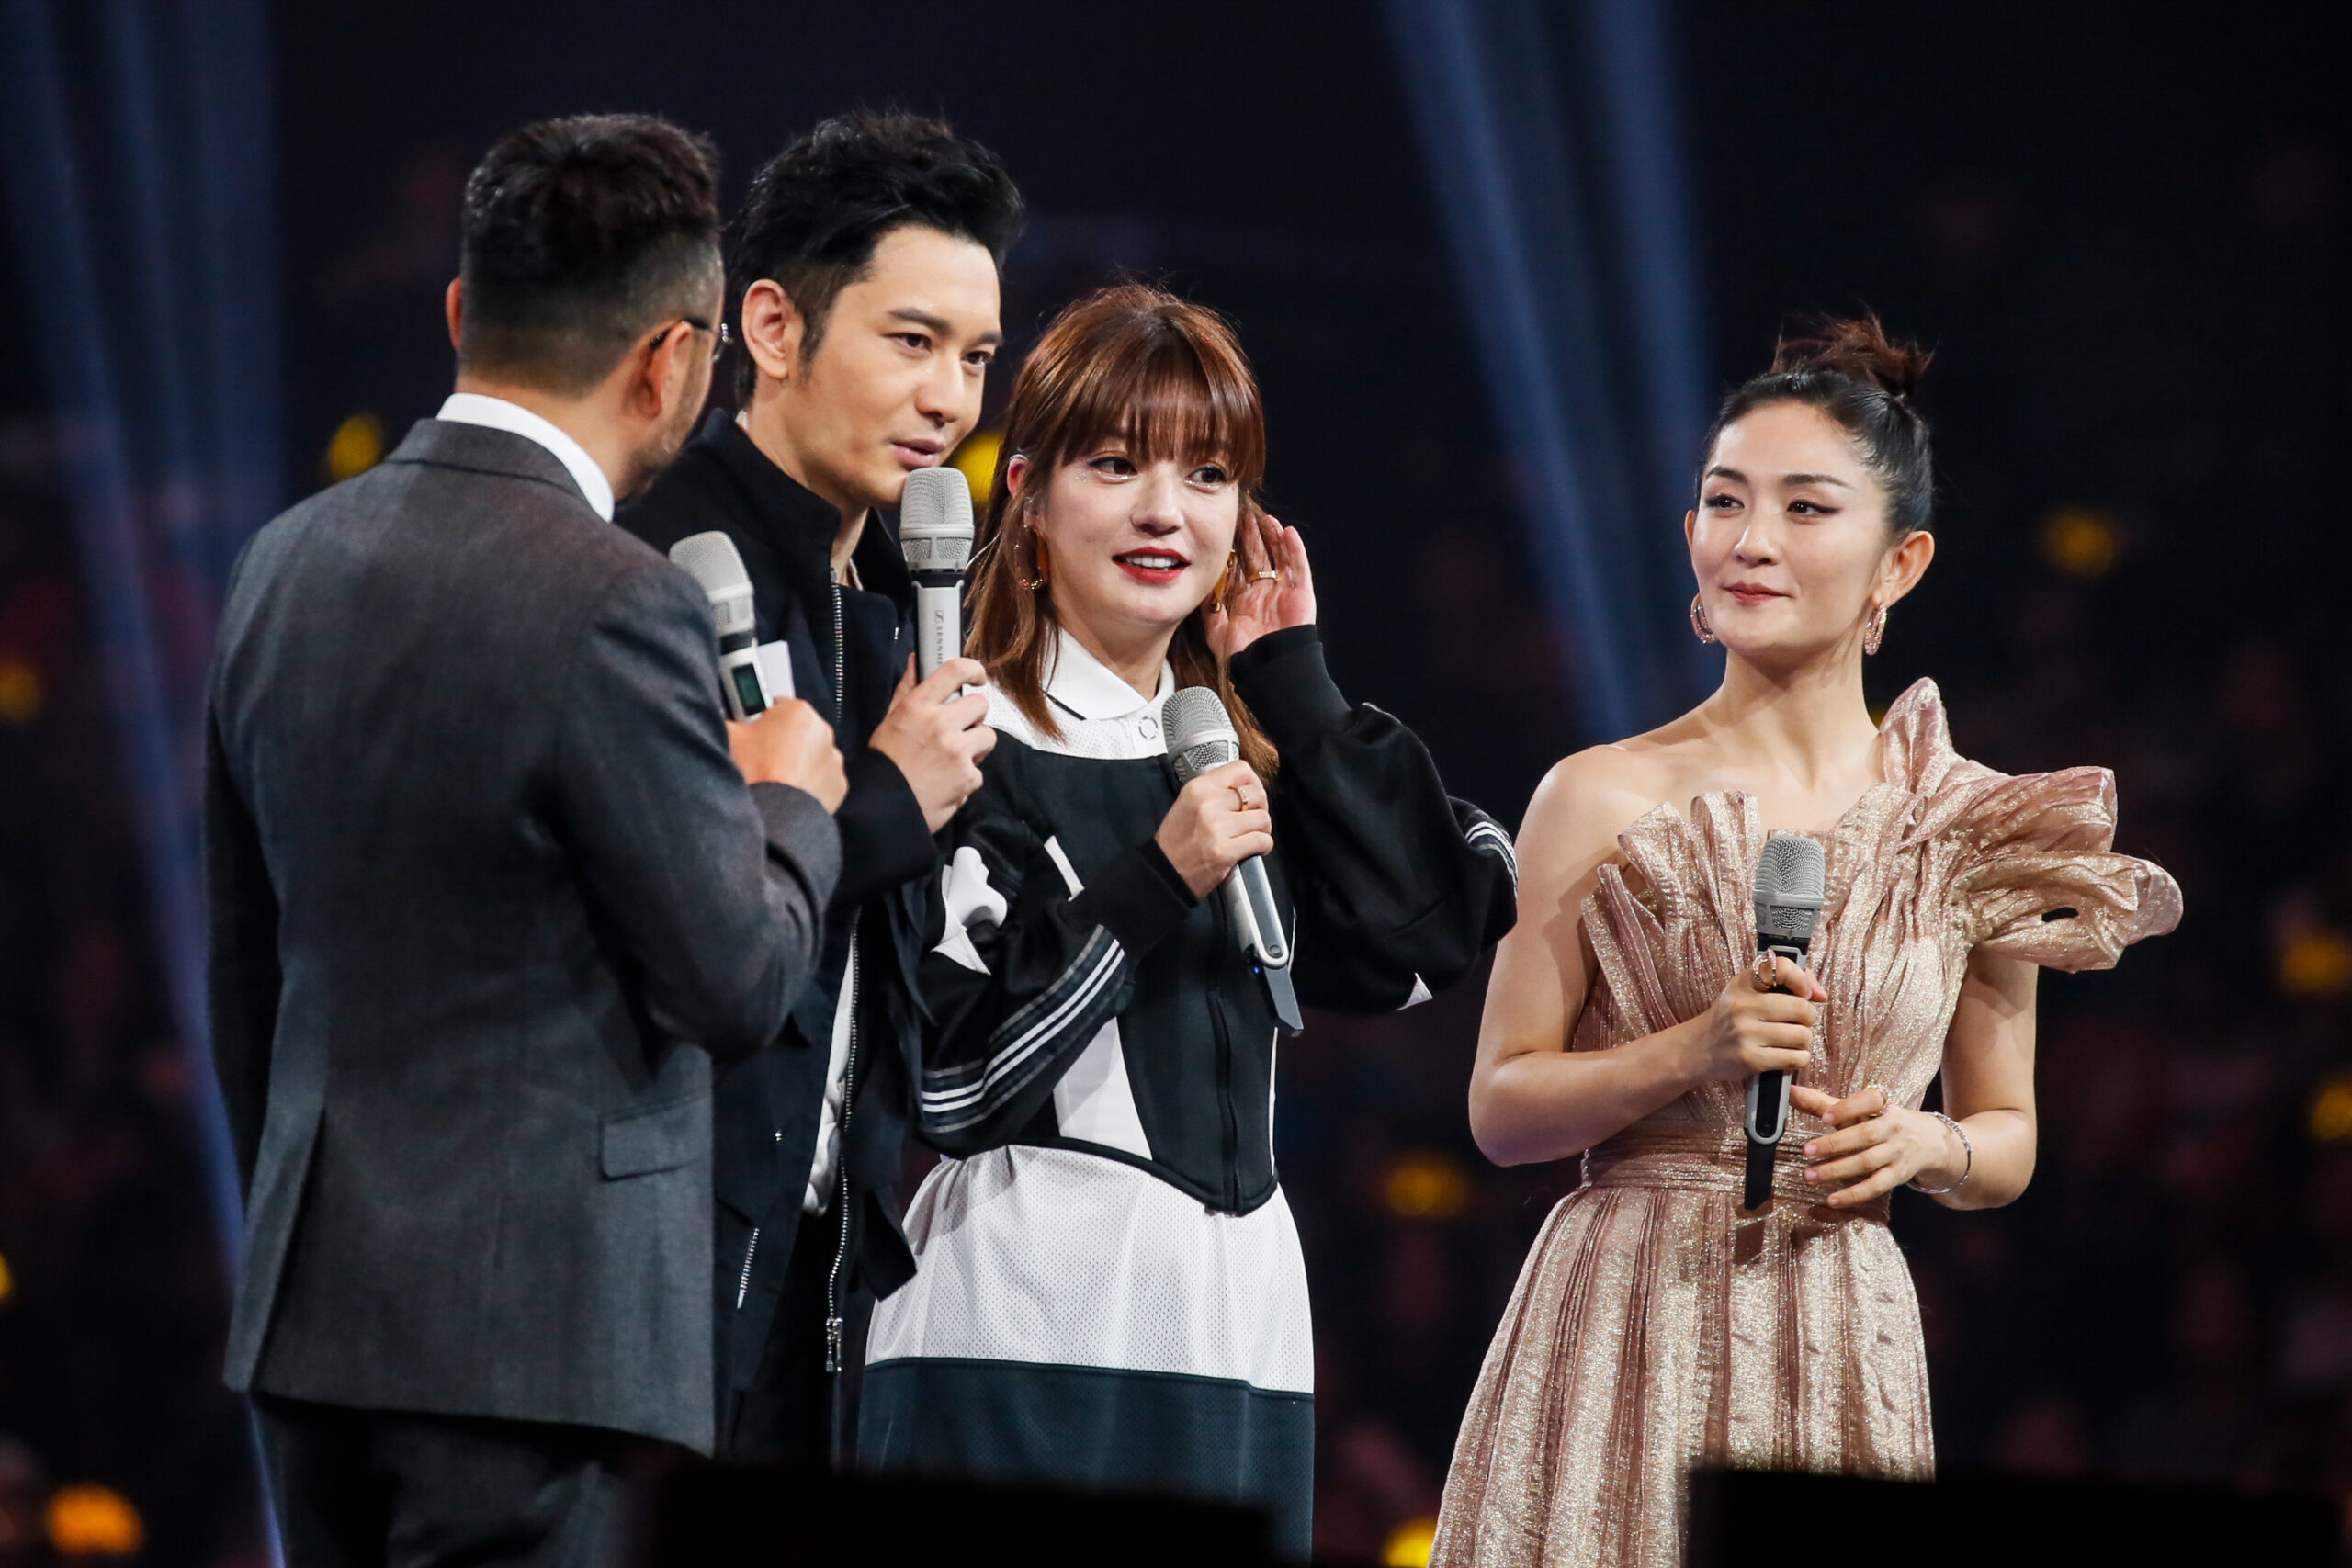 How Chinese Celebrities Are Amplifying Official Policy on Taiwan Via ‘One China’ Messages